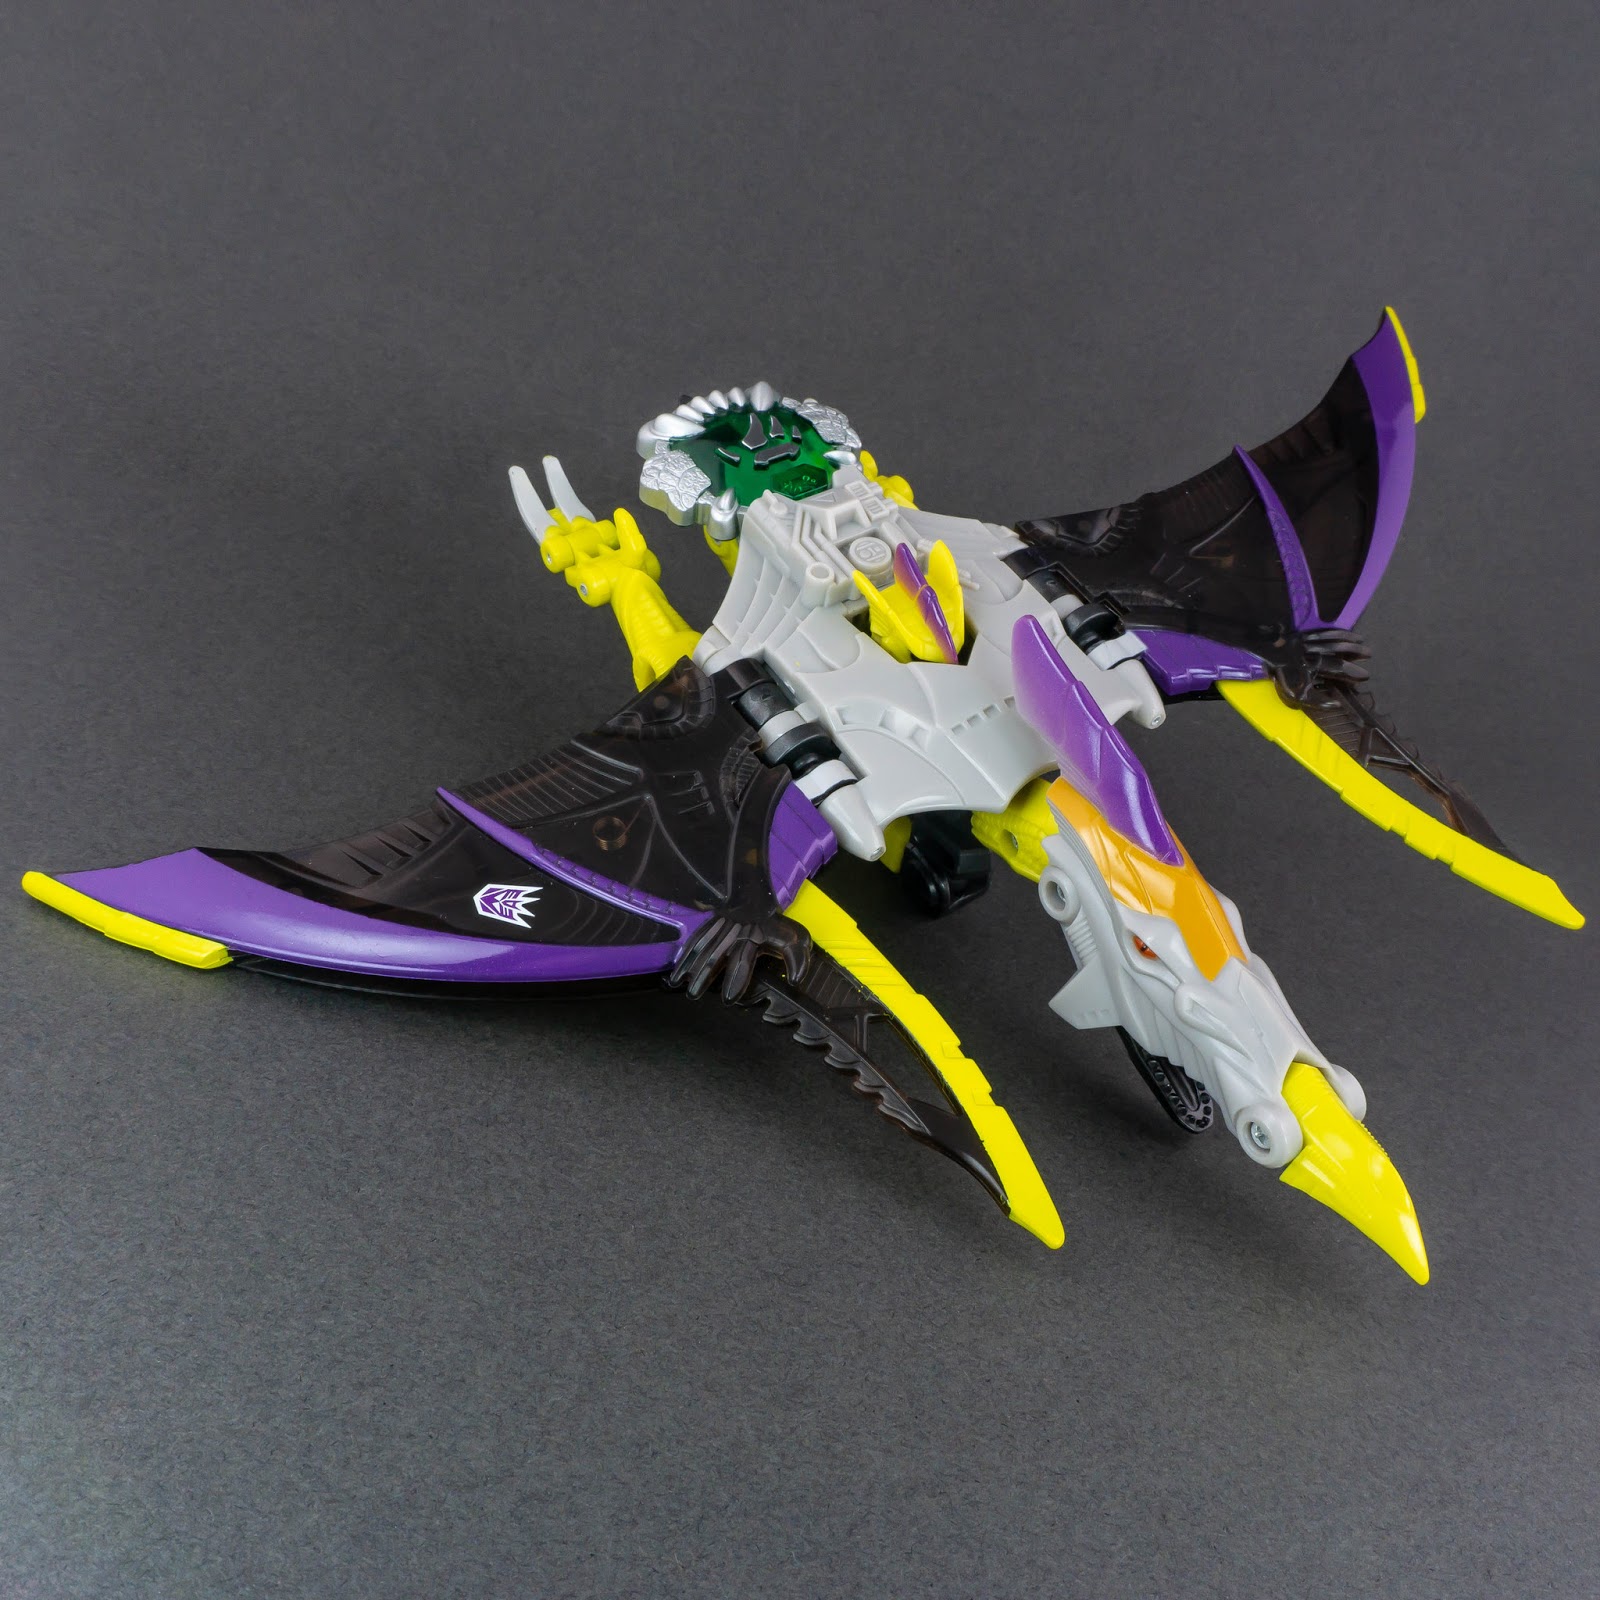 Transformers Cybertron Brimstone Pteranodon mode with Force Chip weapons deployed